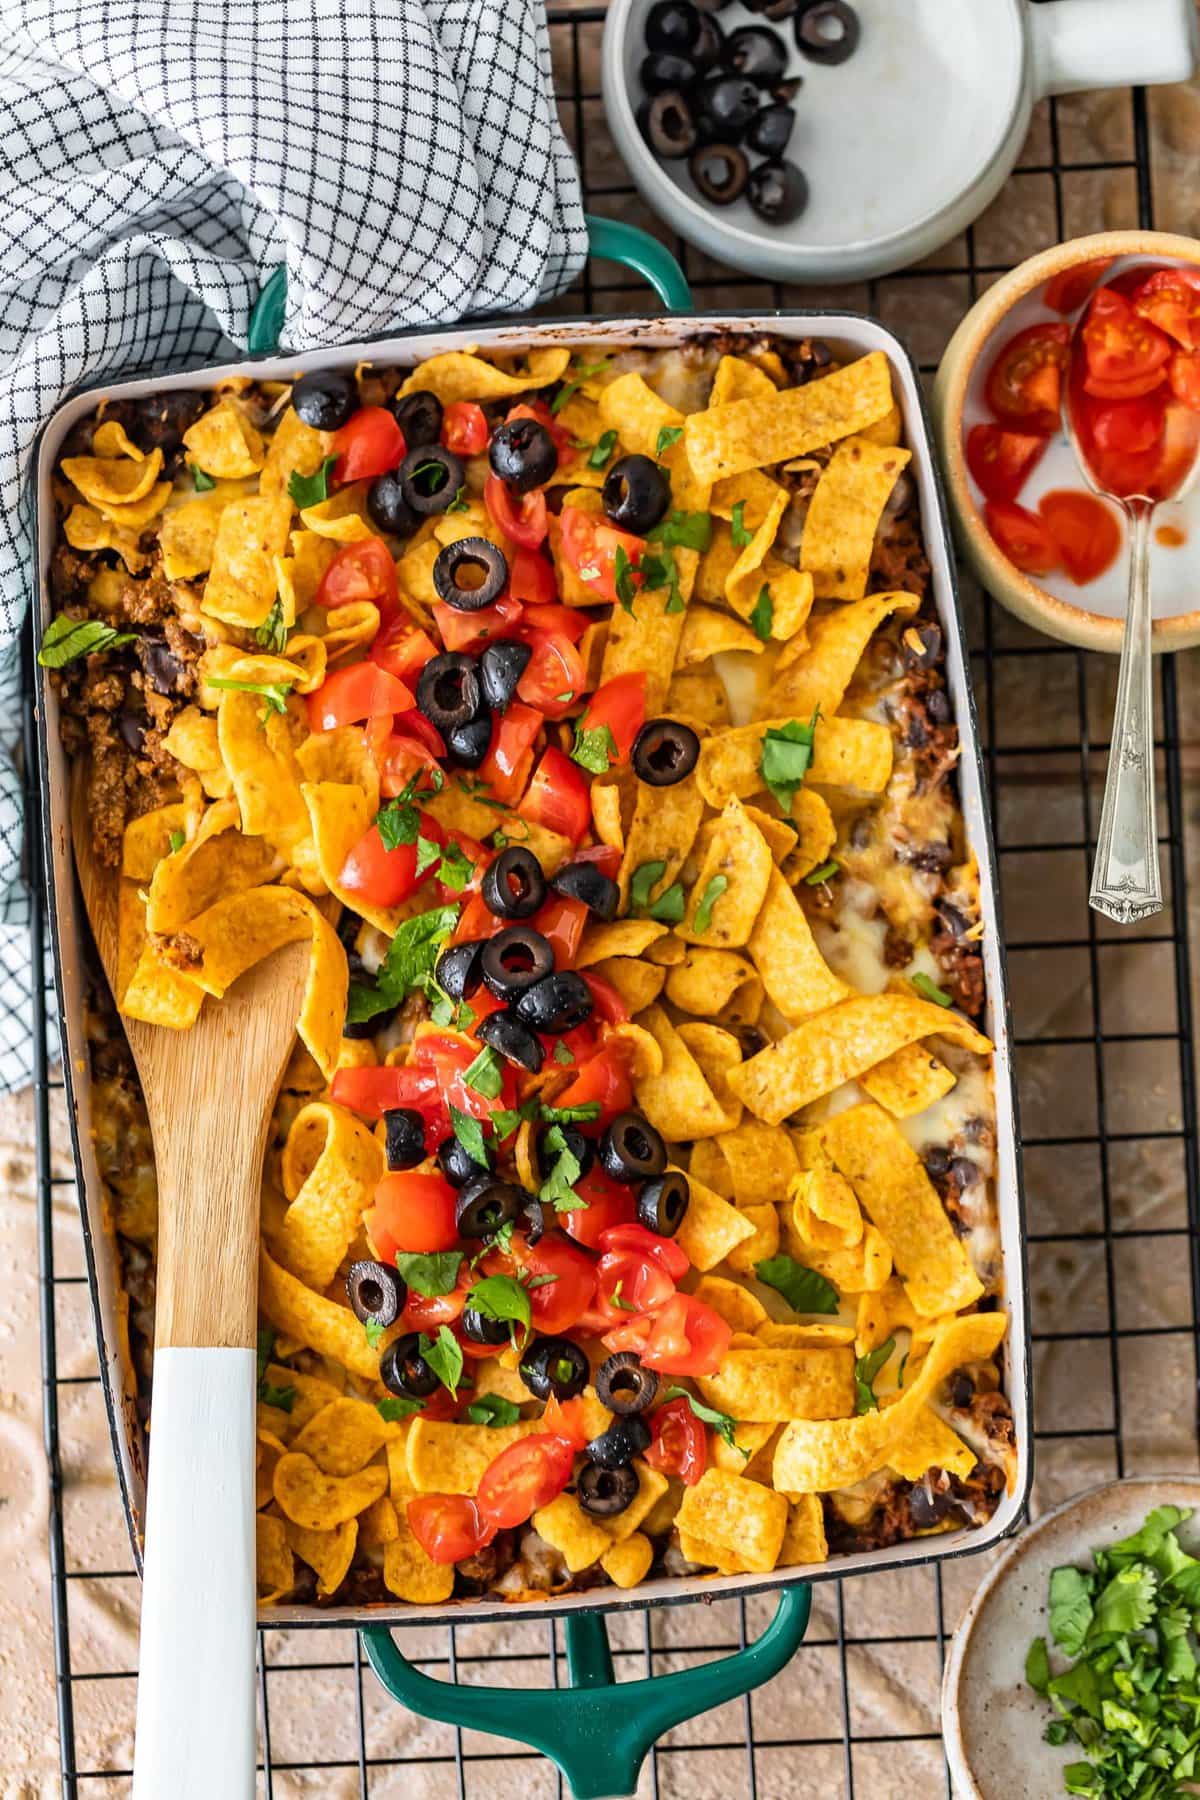 fritos, beef, cheese, olives, tomatoes, onions layered into a casserole dish